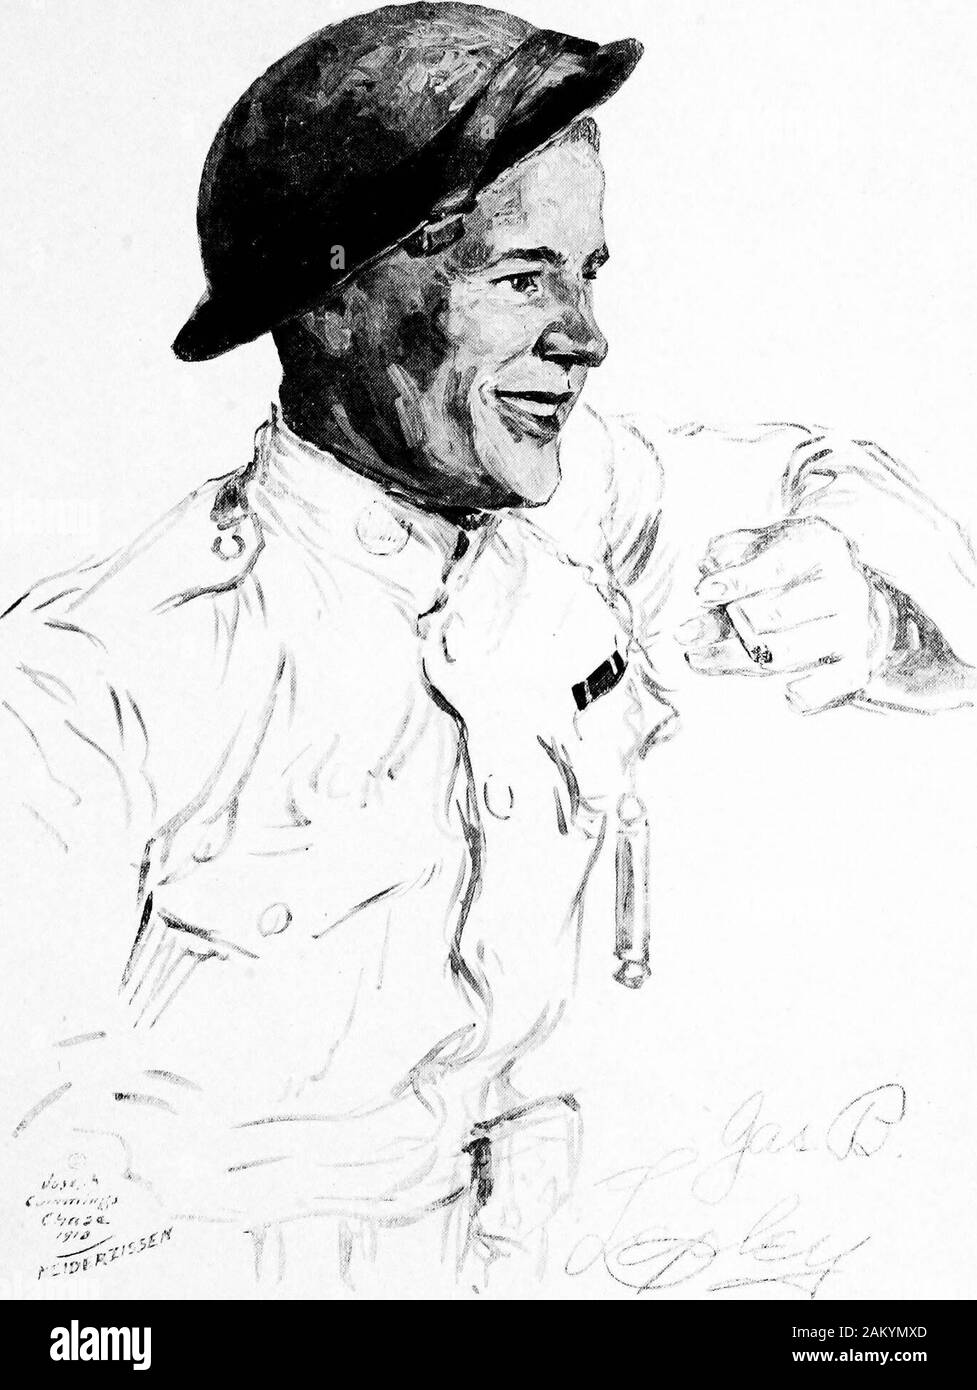 Soldiers all; portraits and sketches of the men of the AEF. . © JasvuAC4 a JC MX A3, pi/n. JAMES B. LEPLEY, Sergeant, Company M, 168th Infantry, 42nd Division.On July 28th, near Sergy, he led his platoon for-ward in the face of heavy machine-gun fire, and inspite of being wounded, captured six machine-gunsand thirteen prisoners from the Prussian Guards.Near Souain, to the northeast of Chalons-sur-Marne,on the night of July 14, 1918, Sergeant Lepley lefthis trench and returned to the woods, through asmothering fire of gas, high explosives and shrapnel,to search for two men of his platoon who we Stock Photo